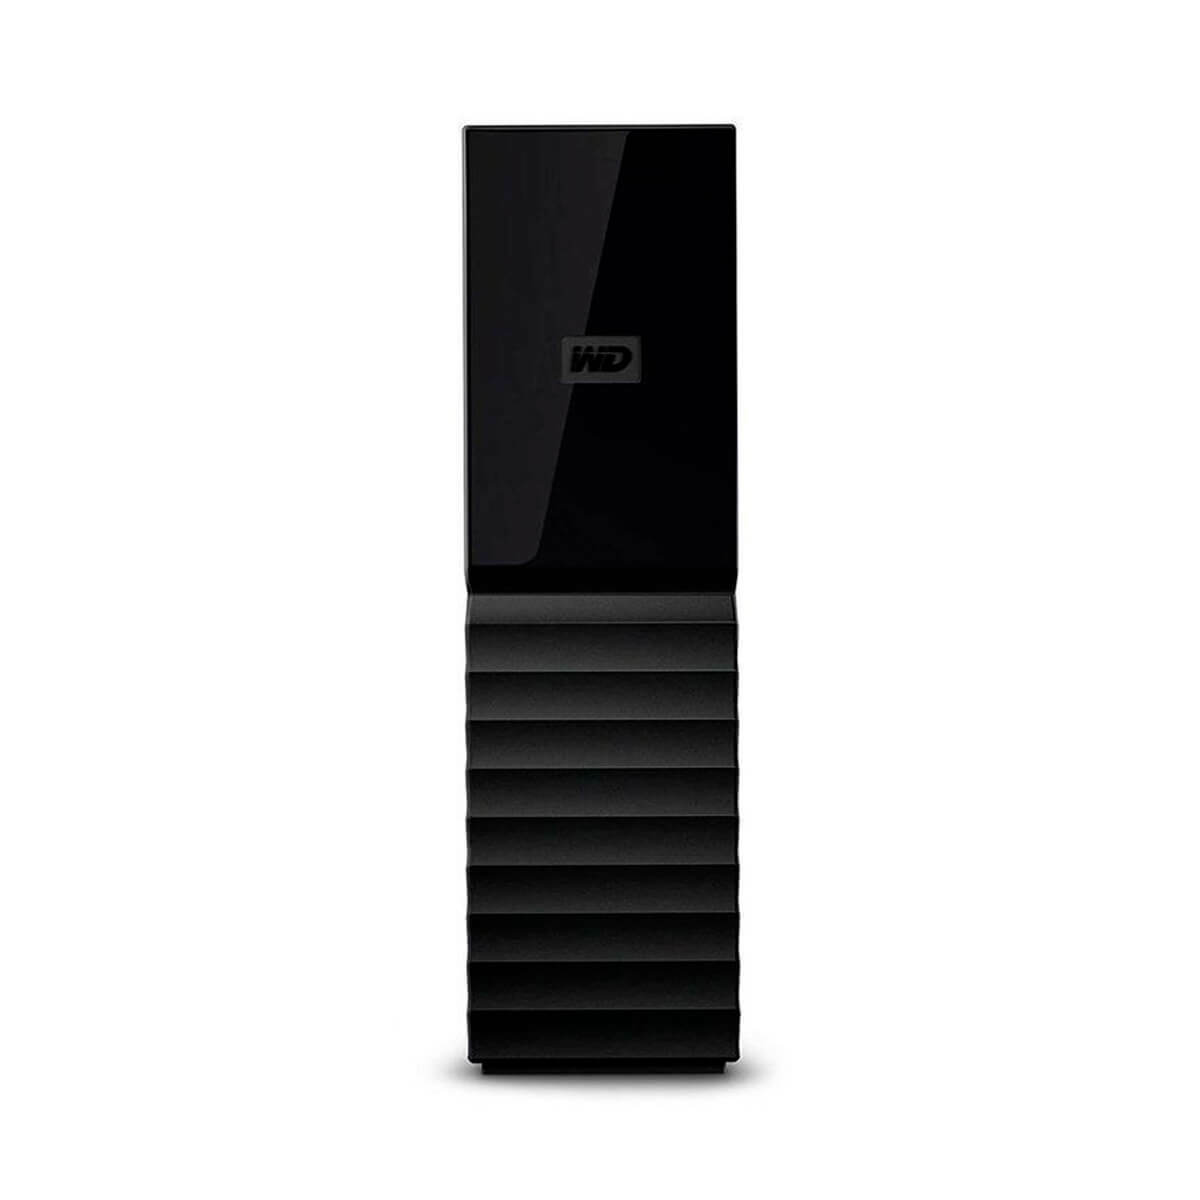 Disque Dur externe Disque externe Western Digital My Book V3 8 To/3,5"/USB 3.0